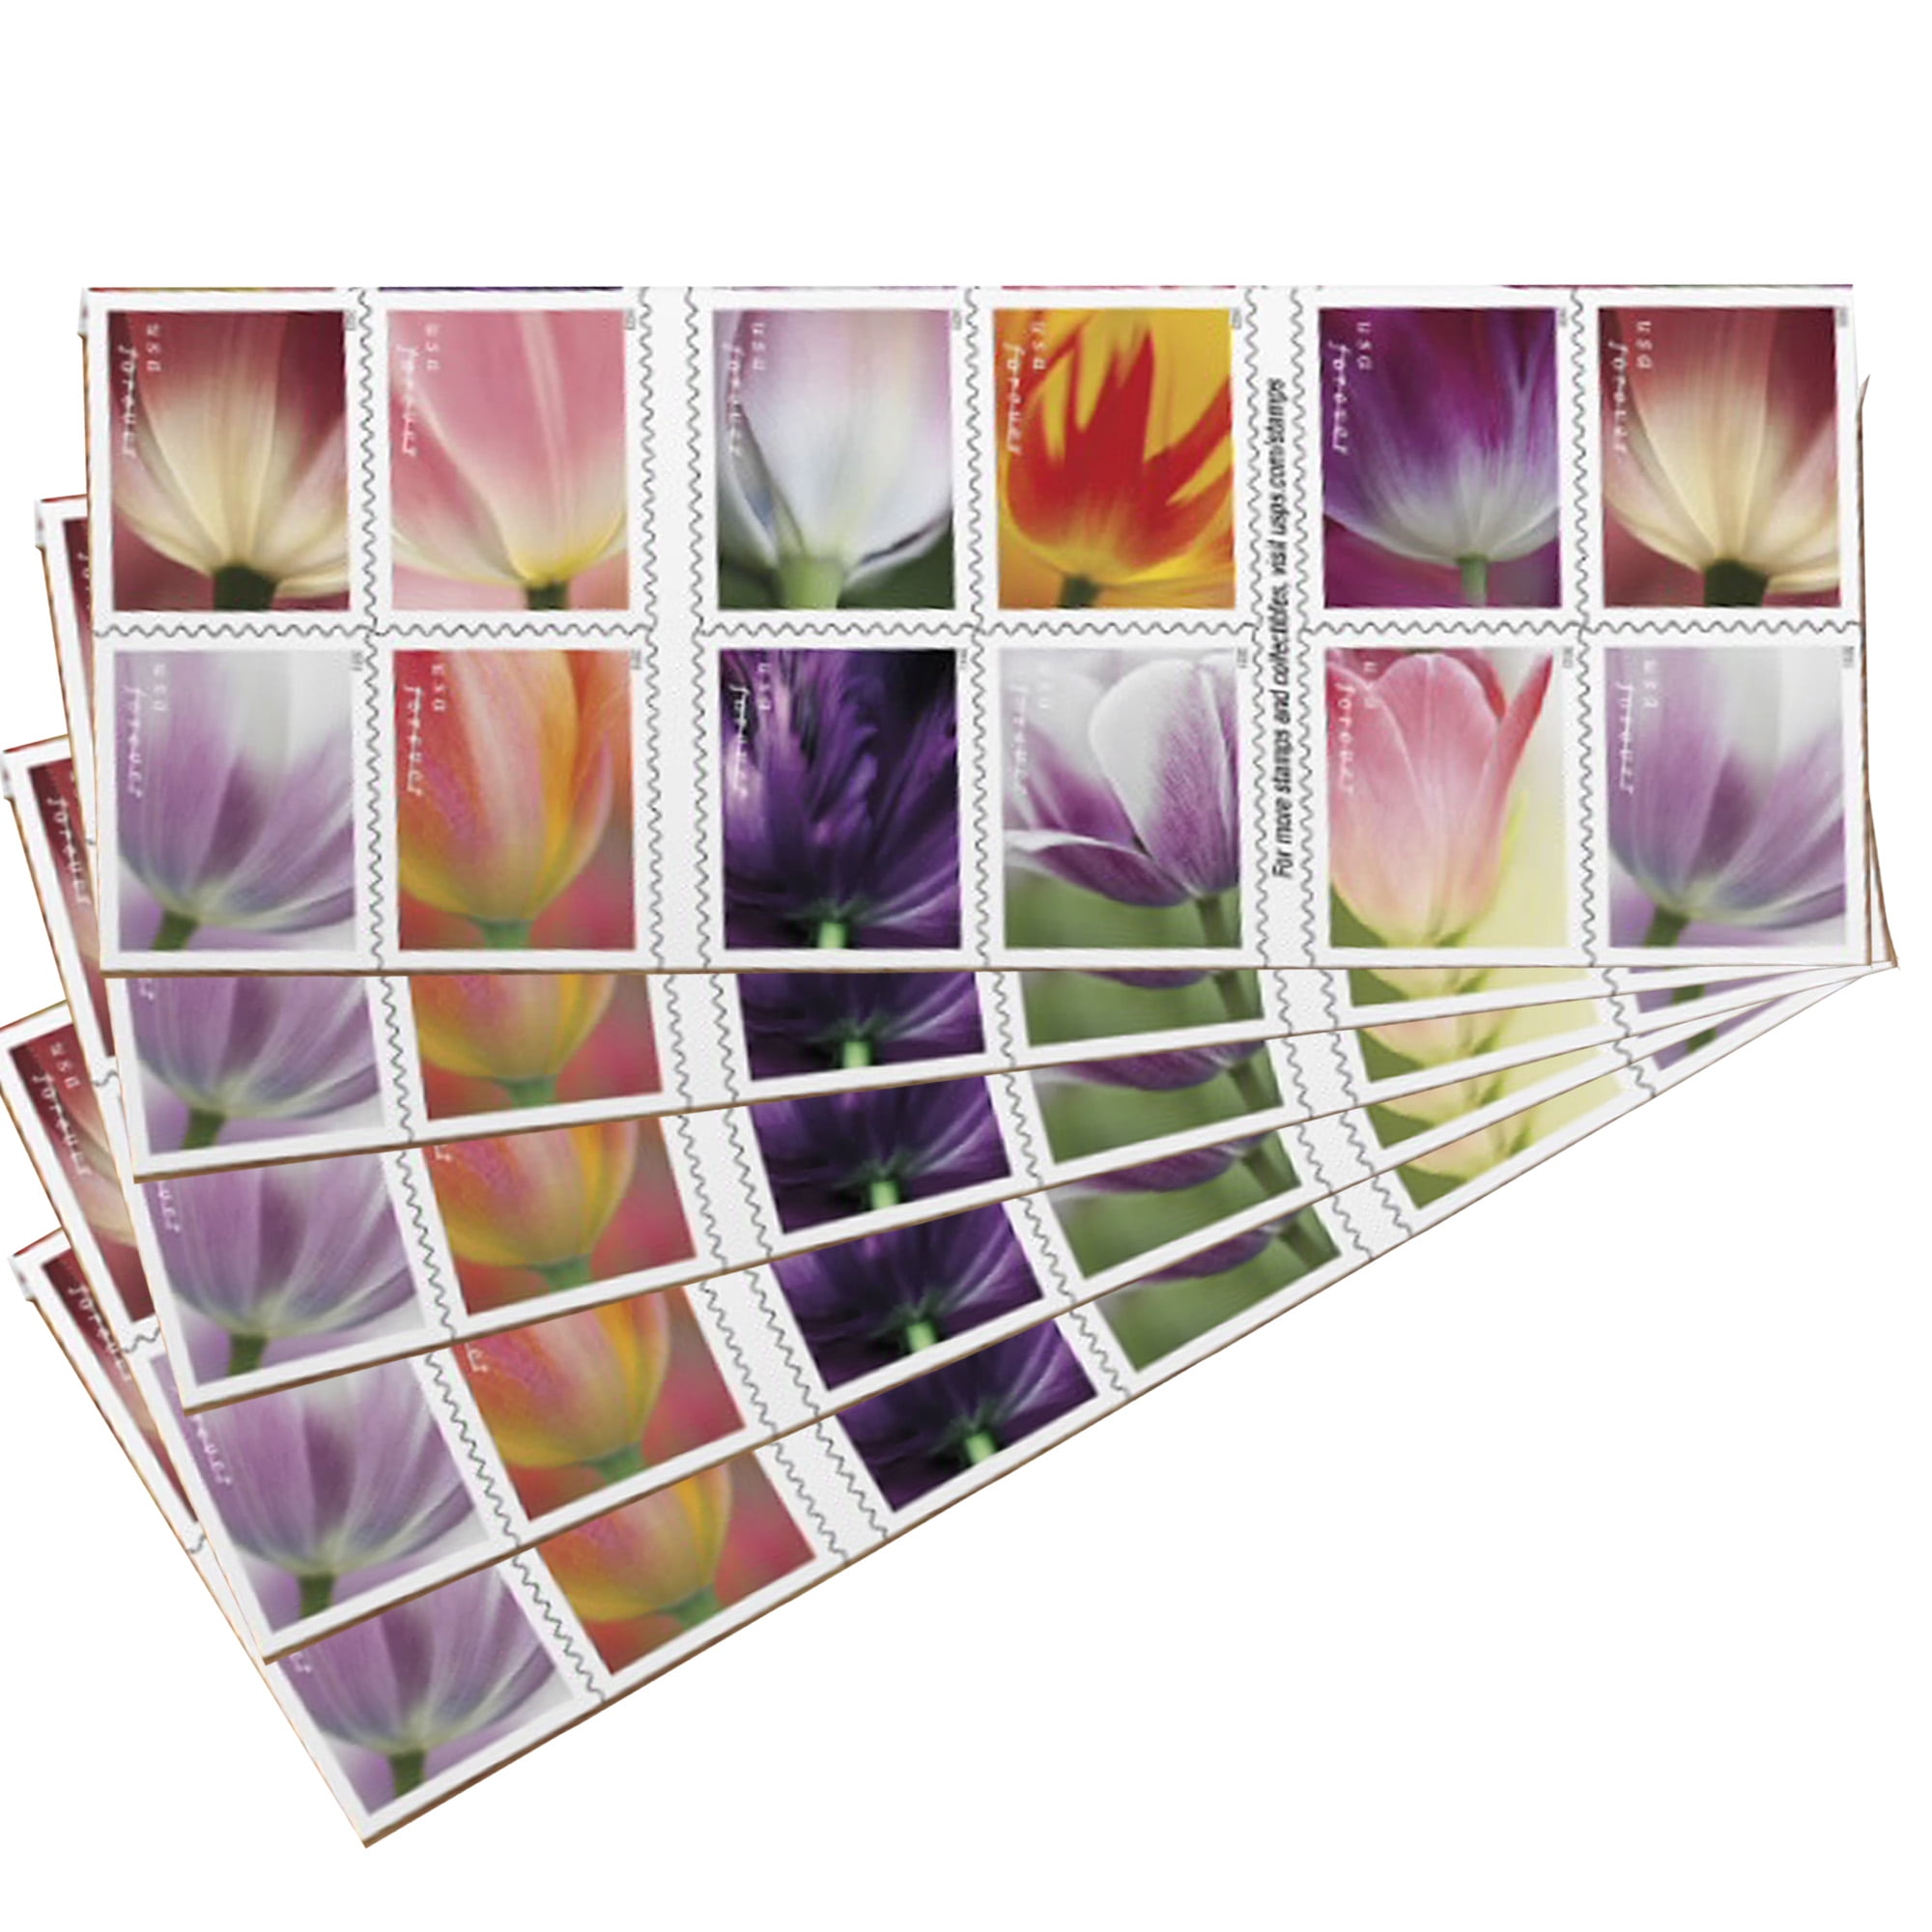 Tulip Blossoms USPS Forever Postage Stamp 5 Books of 20 US First Class  Flower Spring Wedding Holiday Celebrate Announcement Party (100 Stamps) 